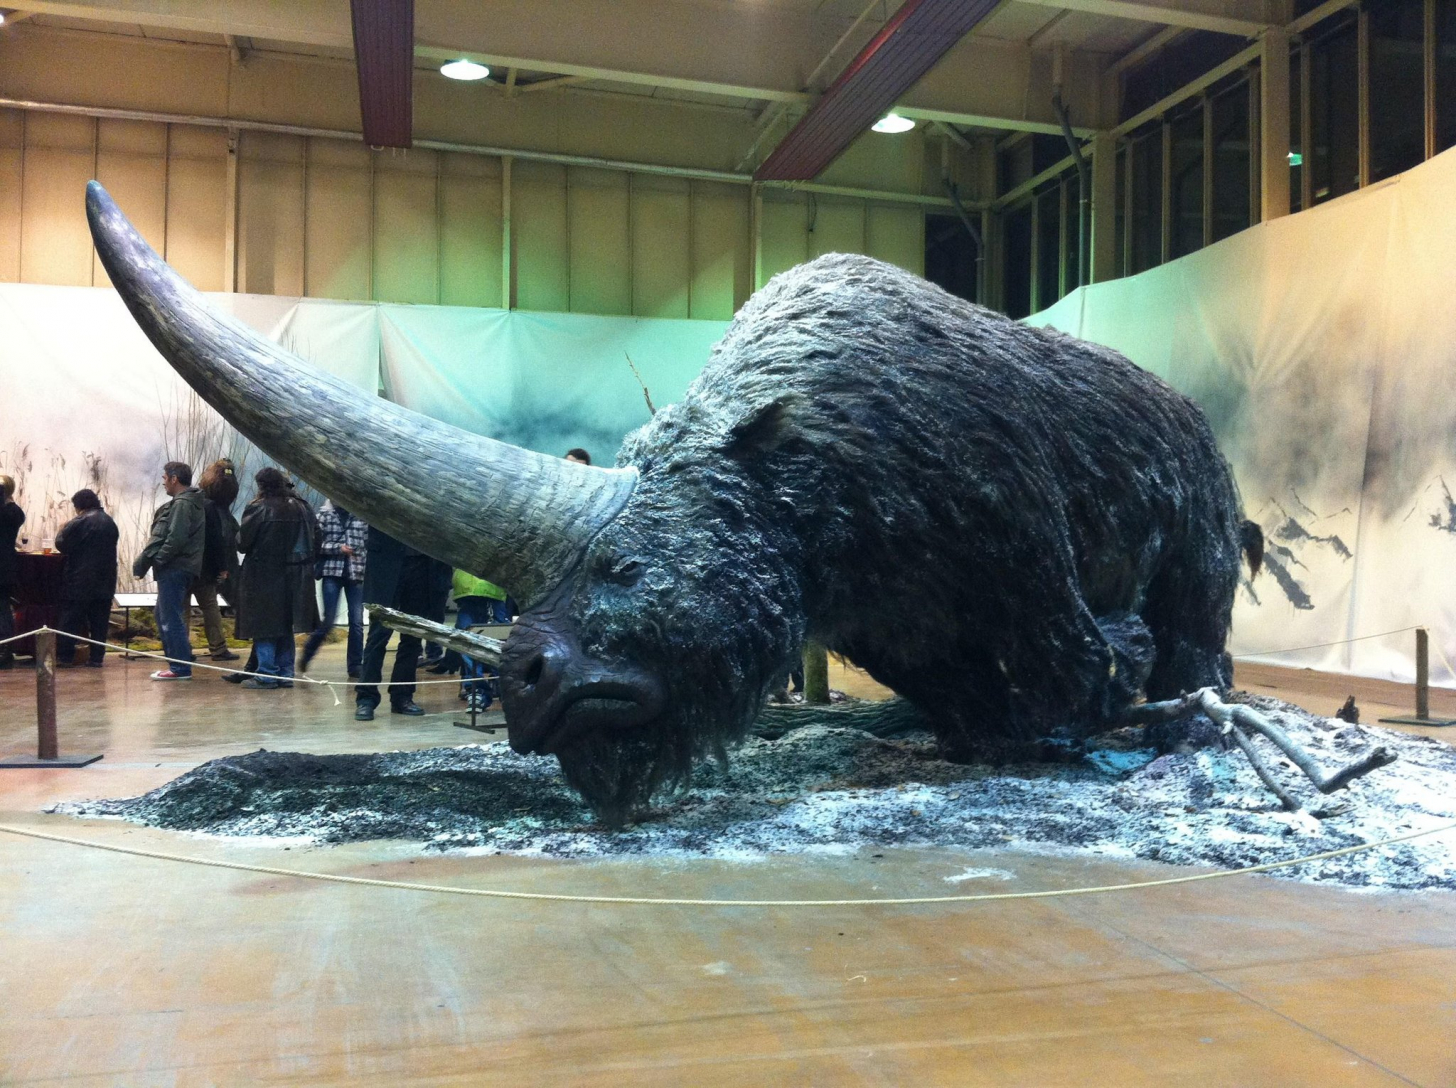 Elasmotherium, also known as the giant siberian unicorn. they did exist!